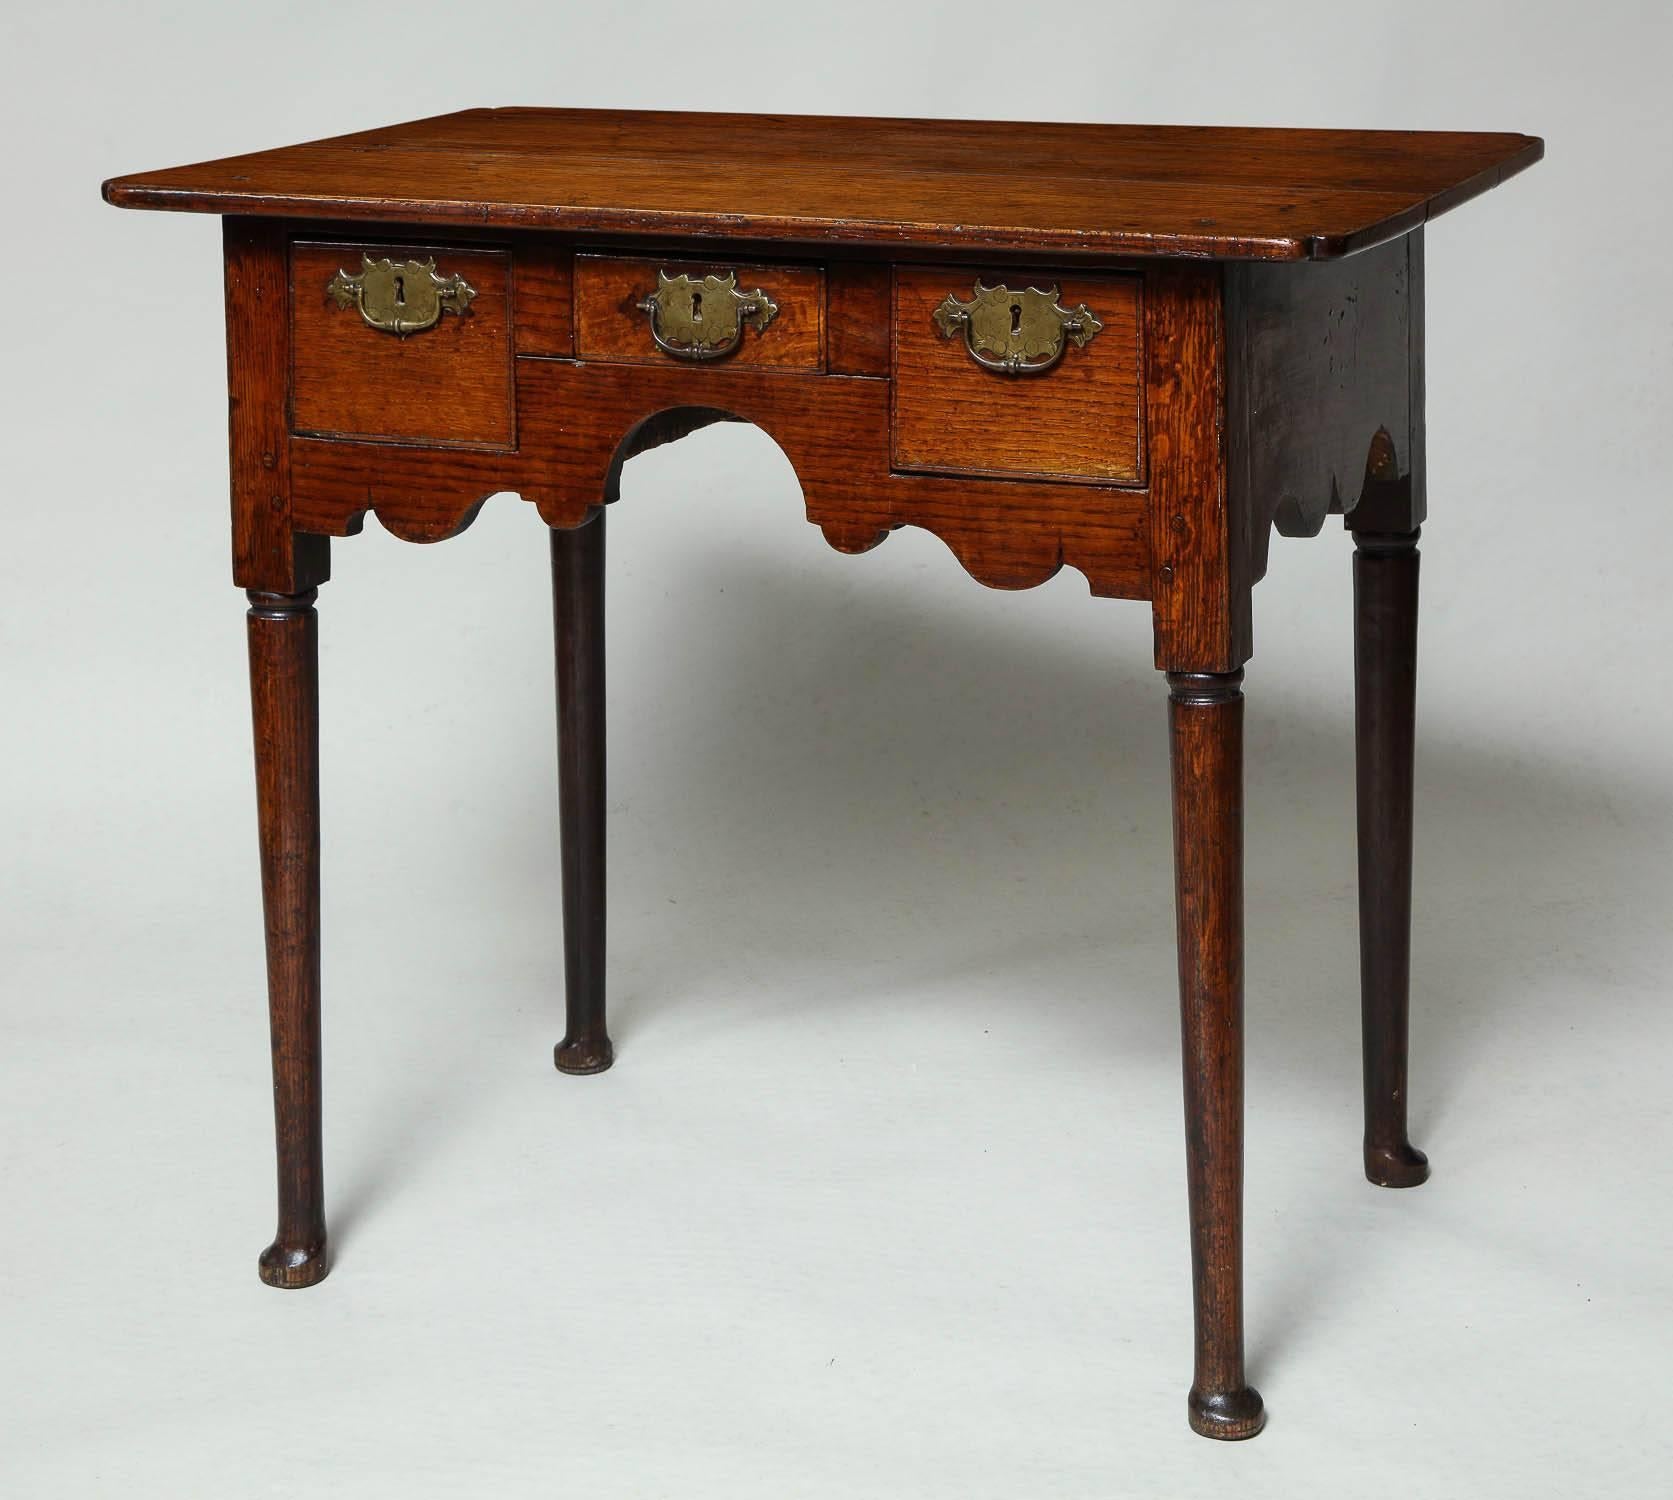 Very fine early 18th century English oak lowboy, the two plank top with re-entrant (baby's bum) corners, over two deep and one shallow drawer with original etched brass hardware, over richly scalloped apron and standing on ring turned legs ending in